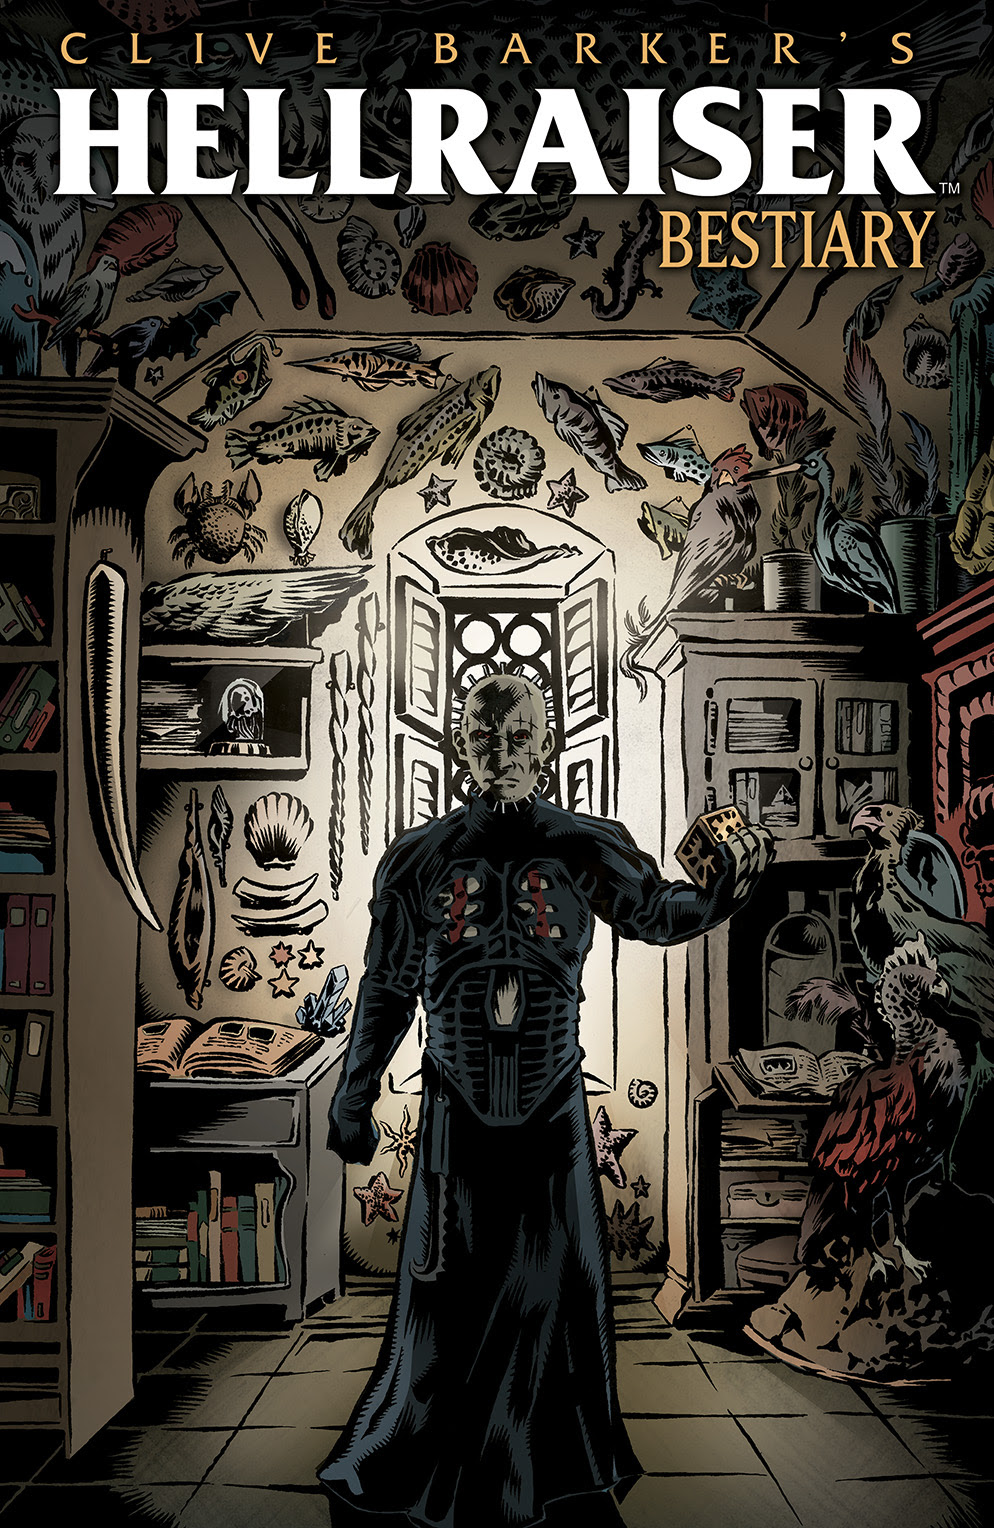 CLIVE BARKER'S HELLRAISER: BESTIARY #5 Cover A by Conor Nolan